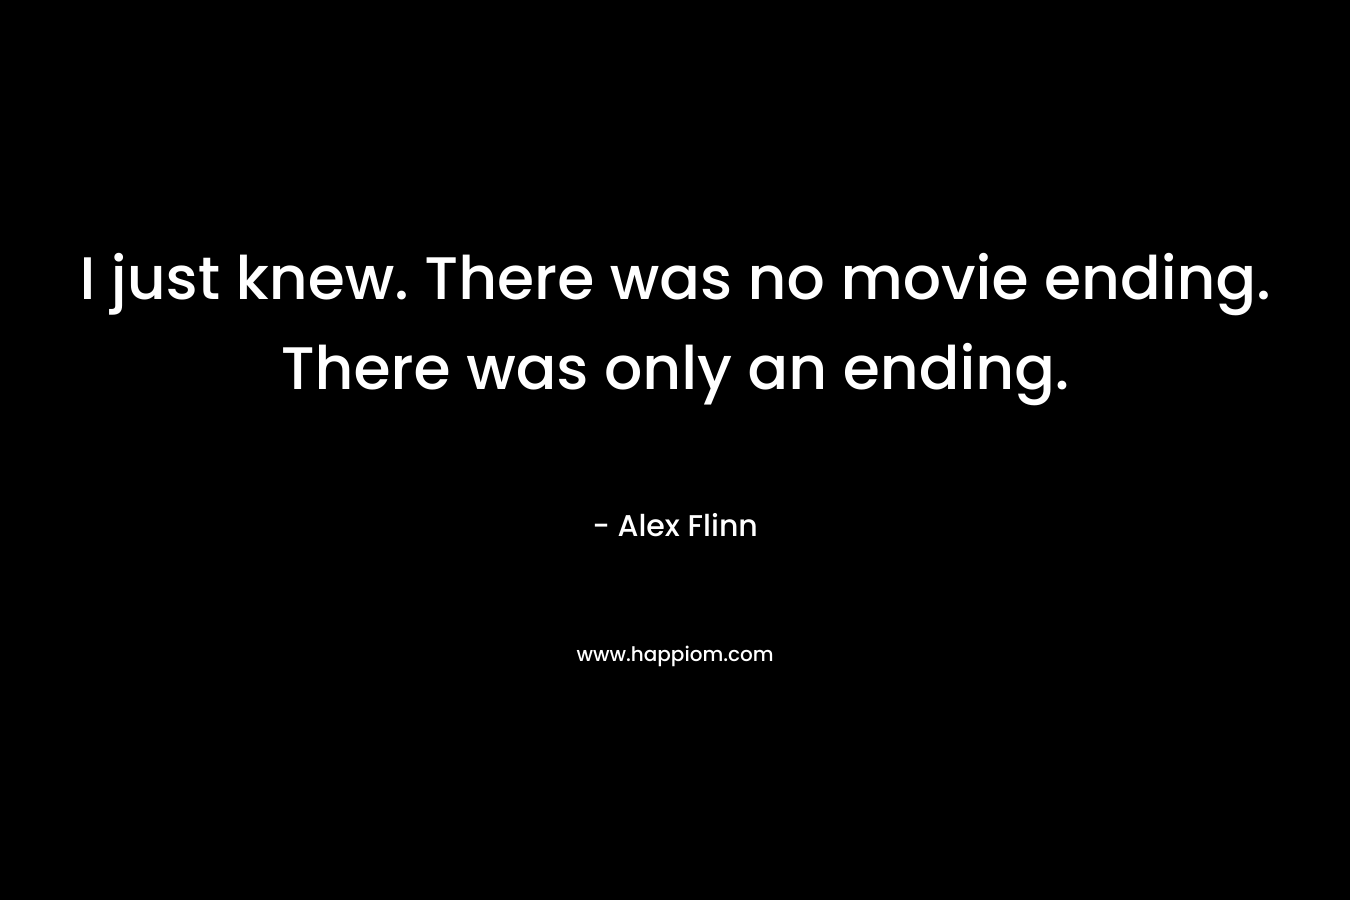 I just knew. There was no movie ending. There was only an ending.